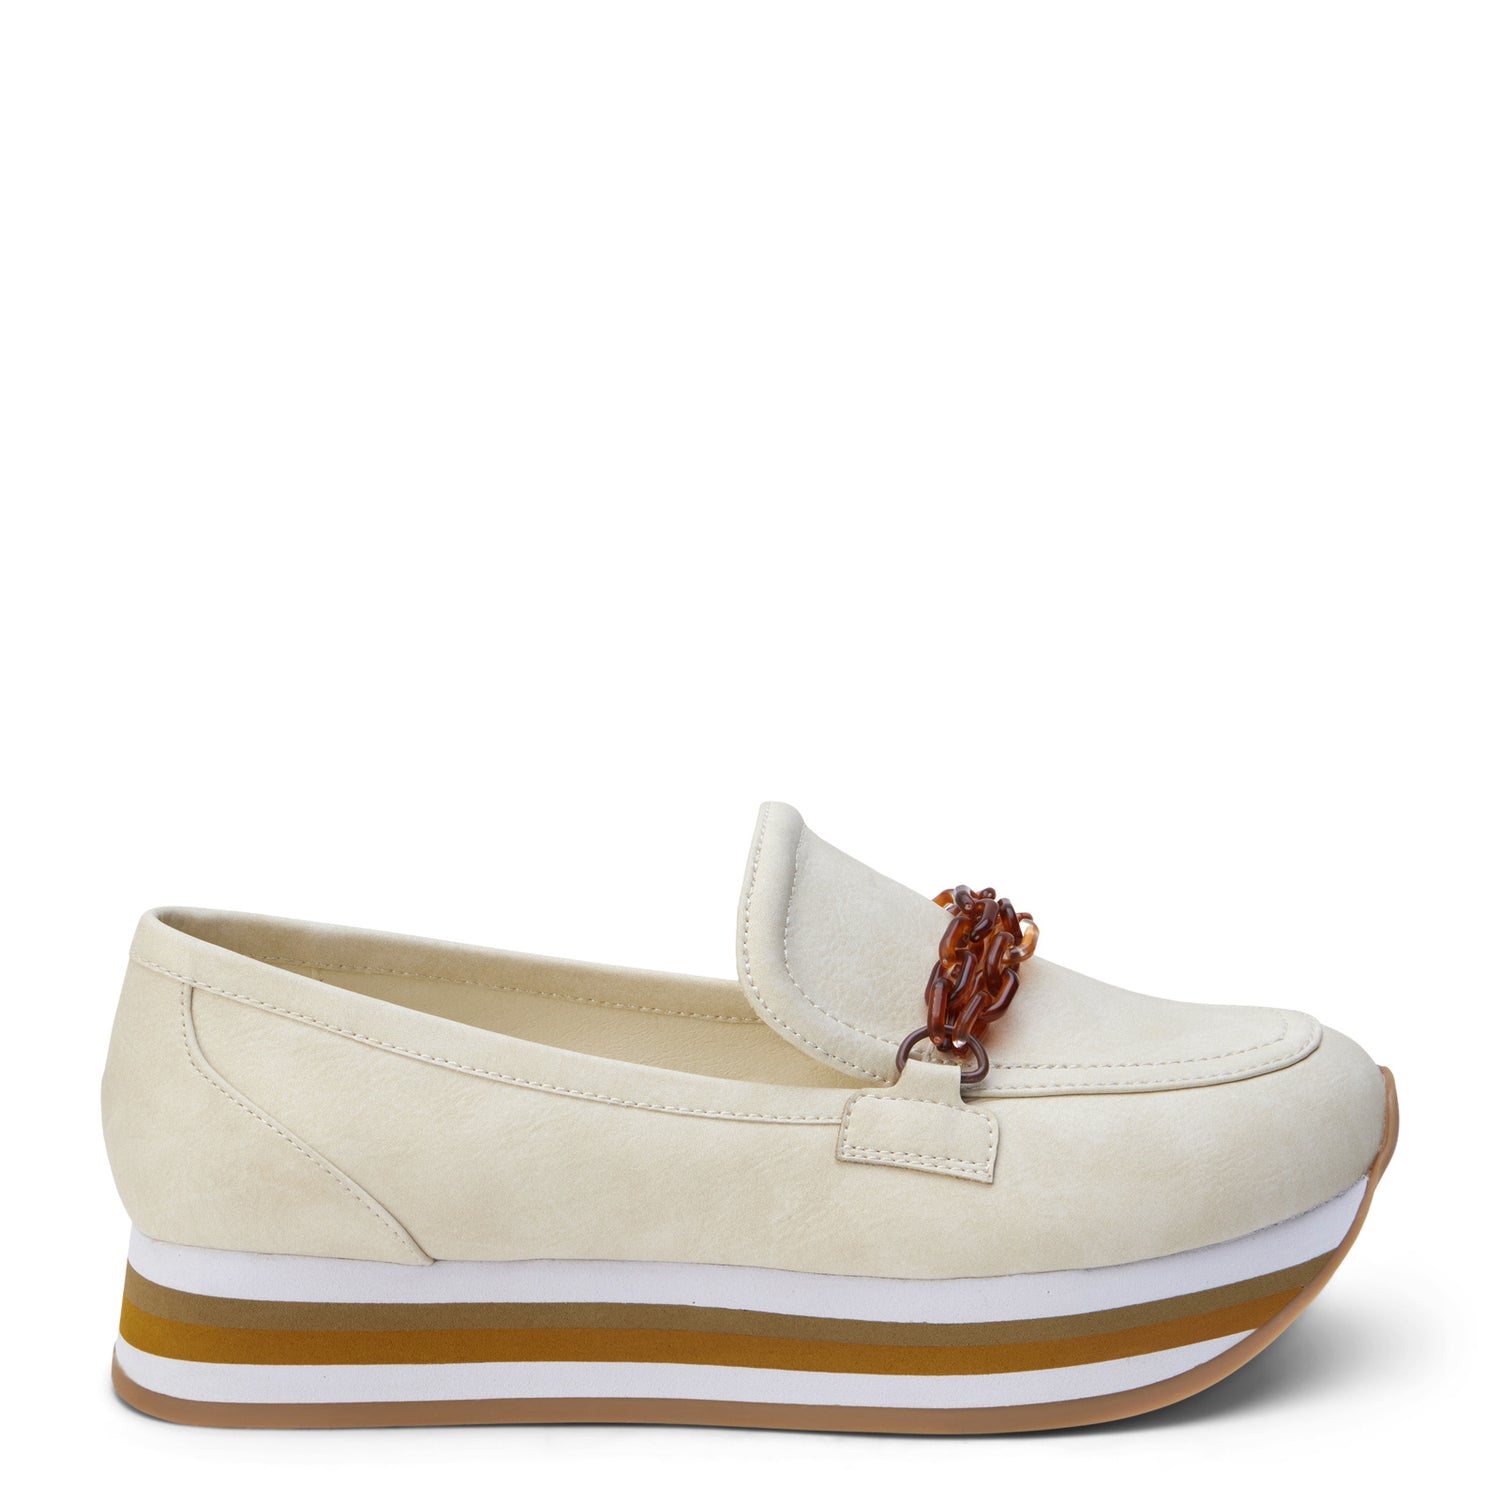 Peltz Shoes  Women's Coconuts by Matisse Carleen Loafer IVORY CARLEEN IVORY